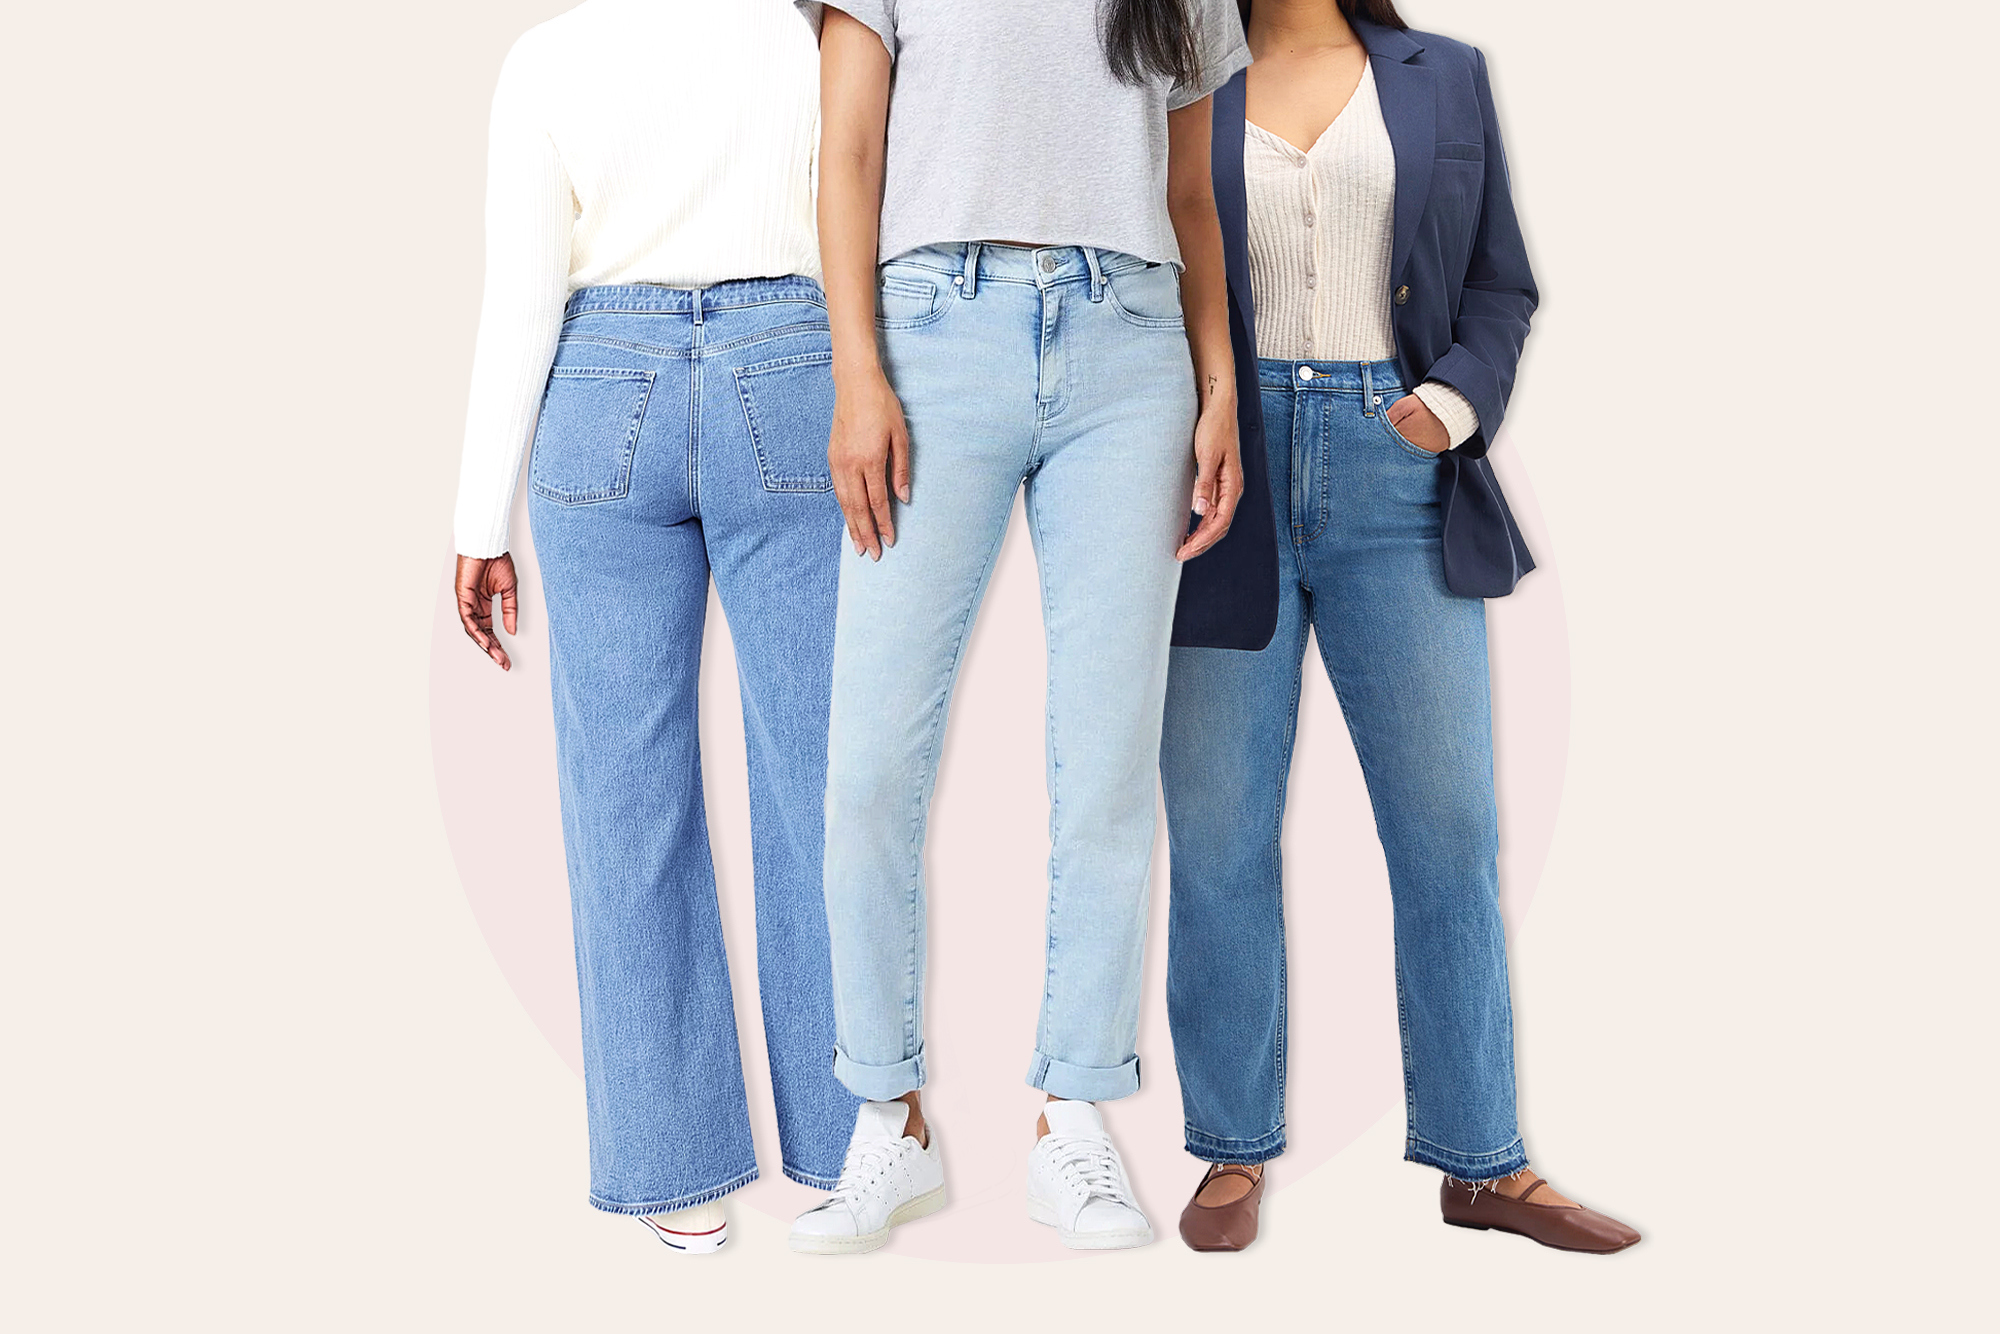 Collage of three women wearing blue jeans